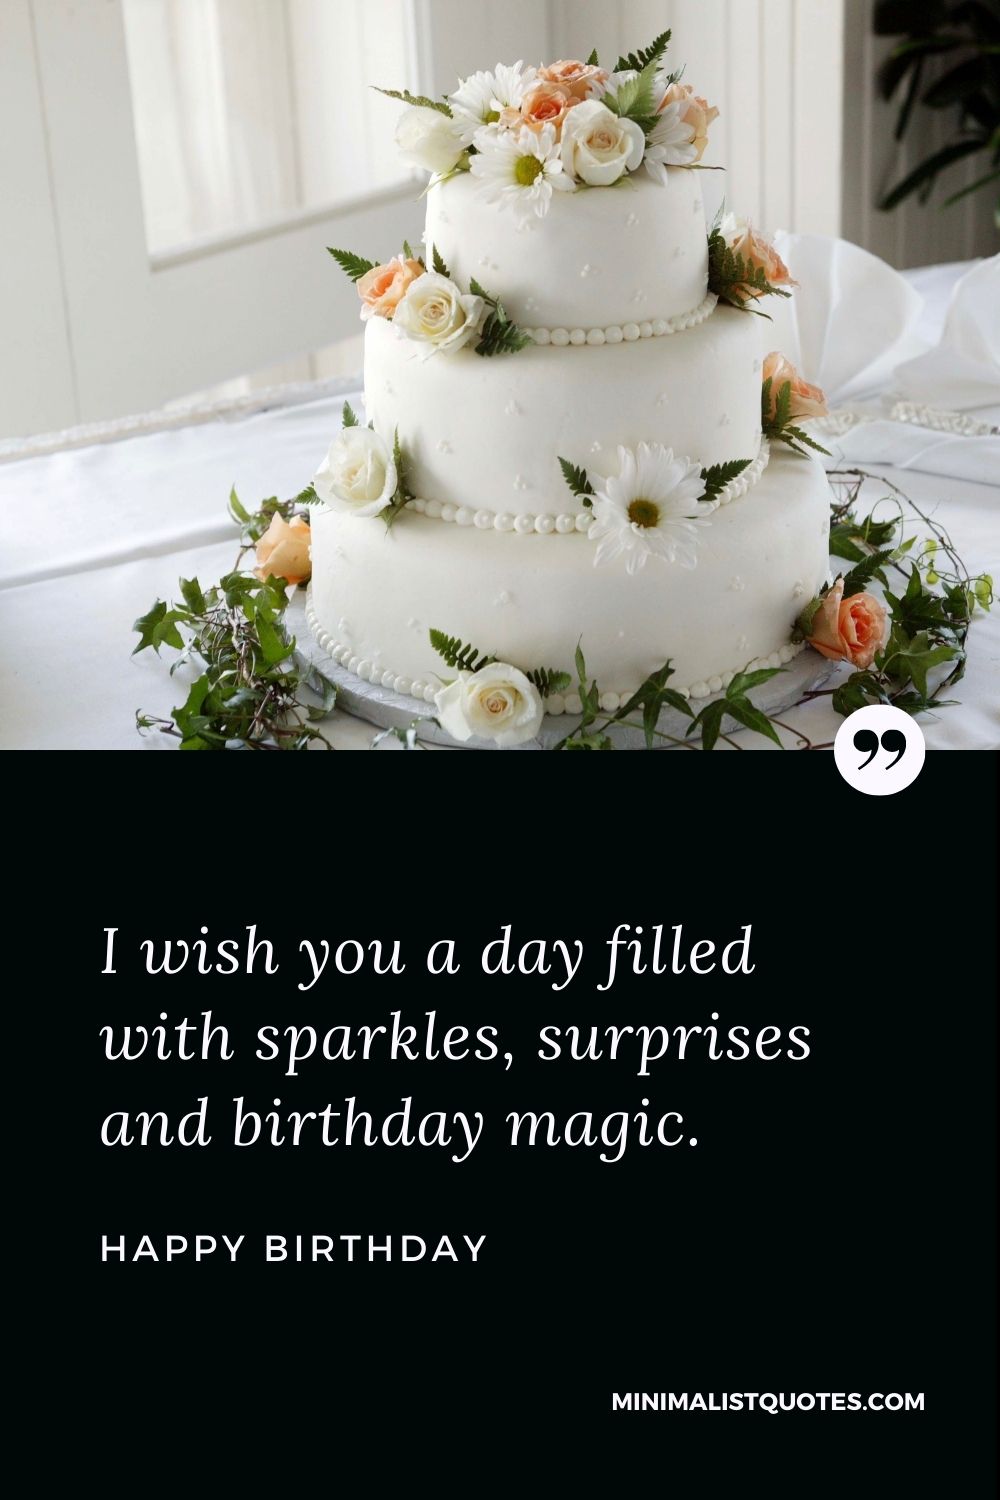 Happy Birthday Wishes - I wish you a day filled with sparkles, surprises and birthday magic.